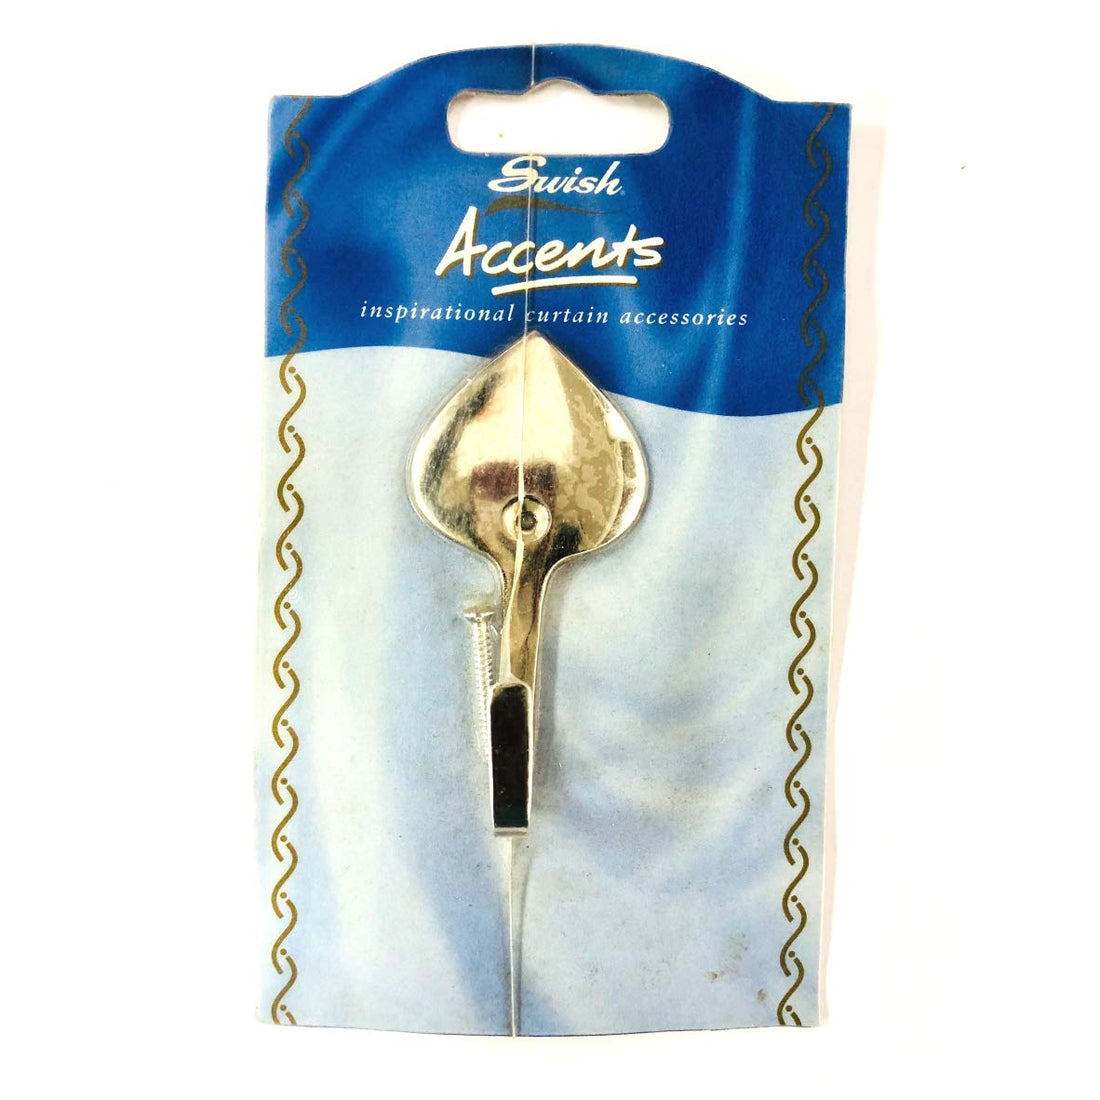 Accents Silver effect tassel hook and fixing